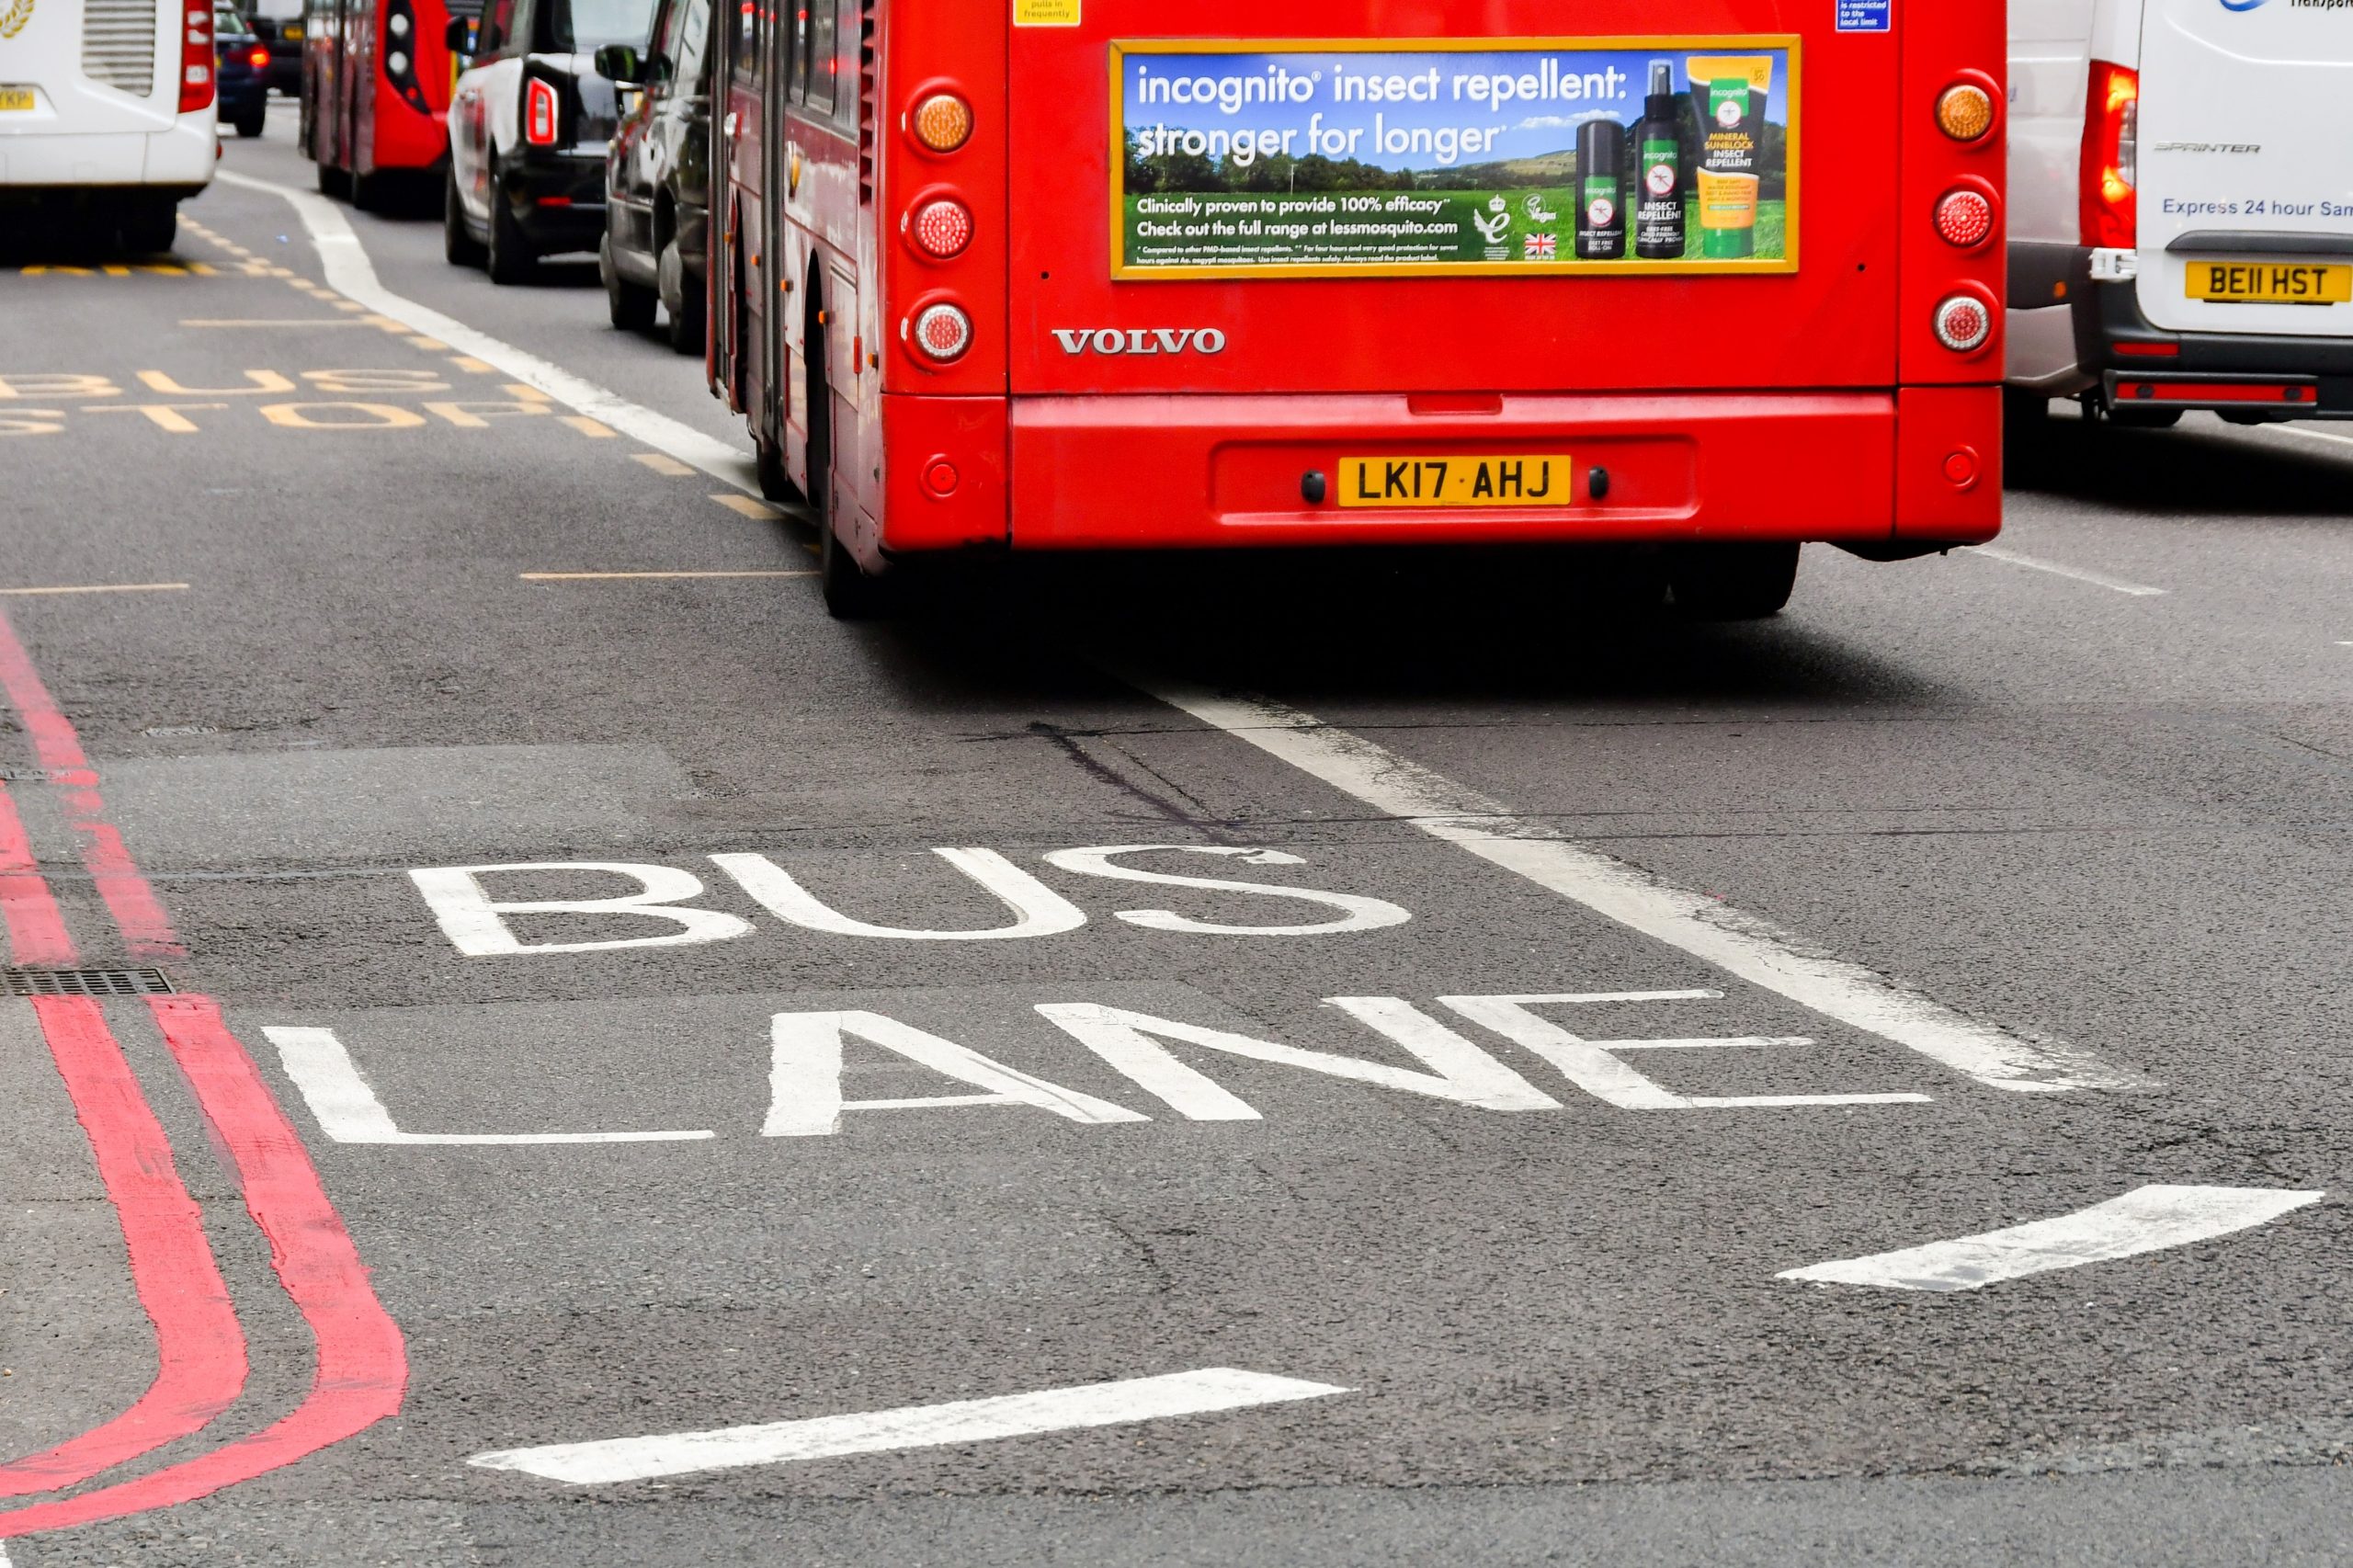 Bus Lane with red London bus